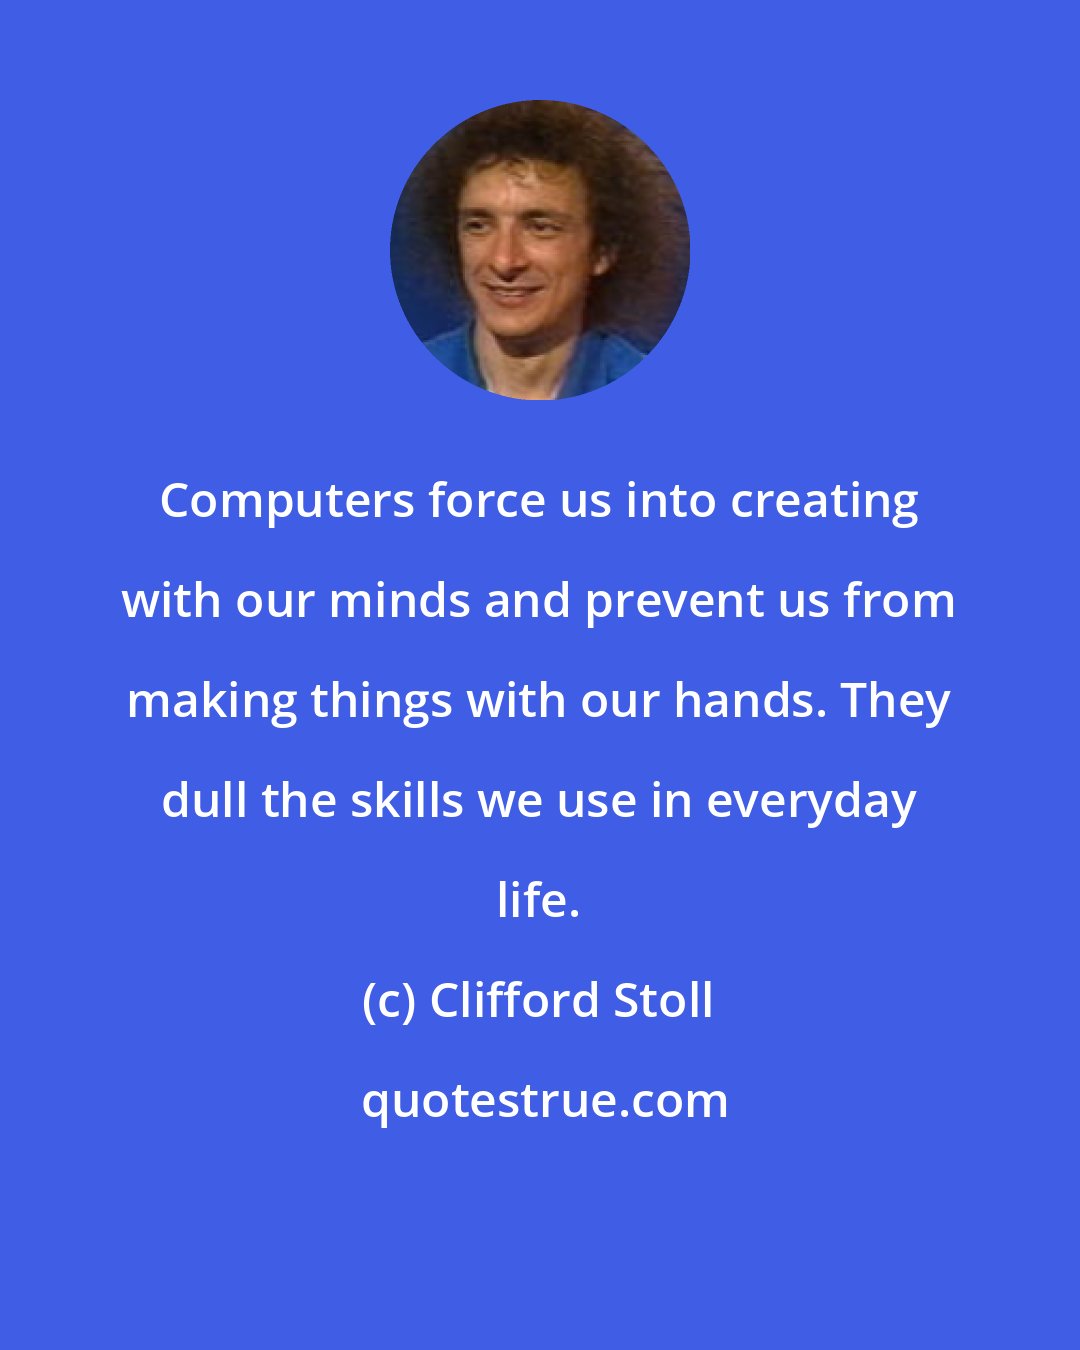 Clifford Stoll: Computers force us into creating with our minds and prevent us from making things with our hands. They dull the skills we use in everyday life.